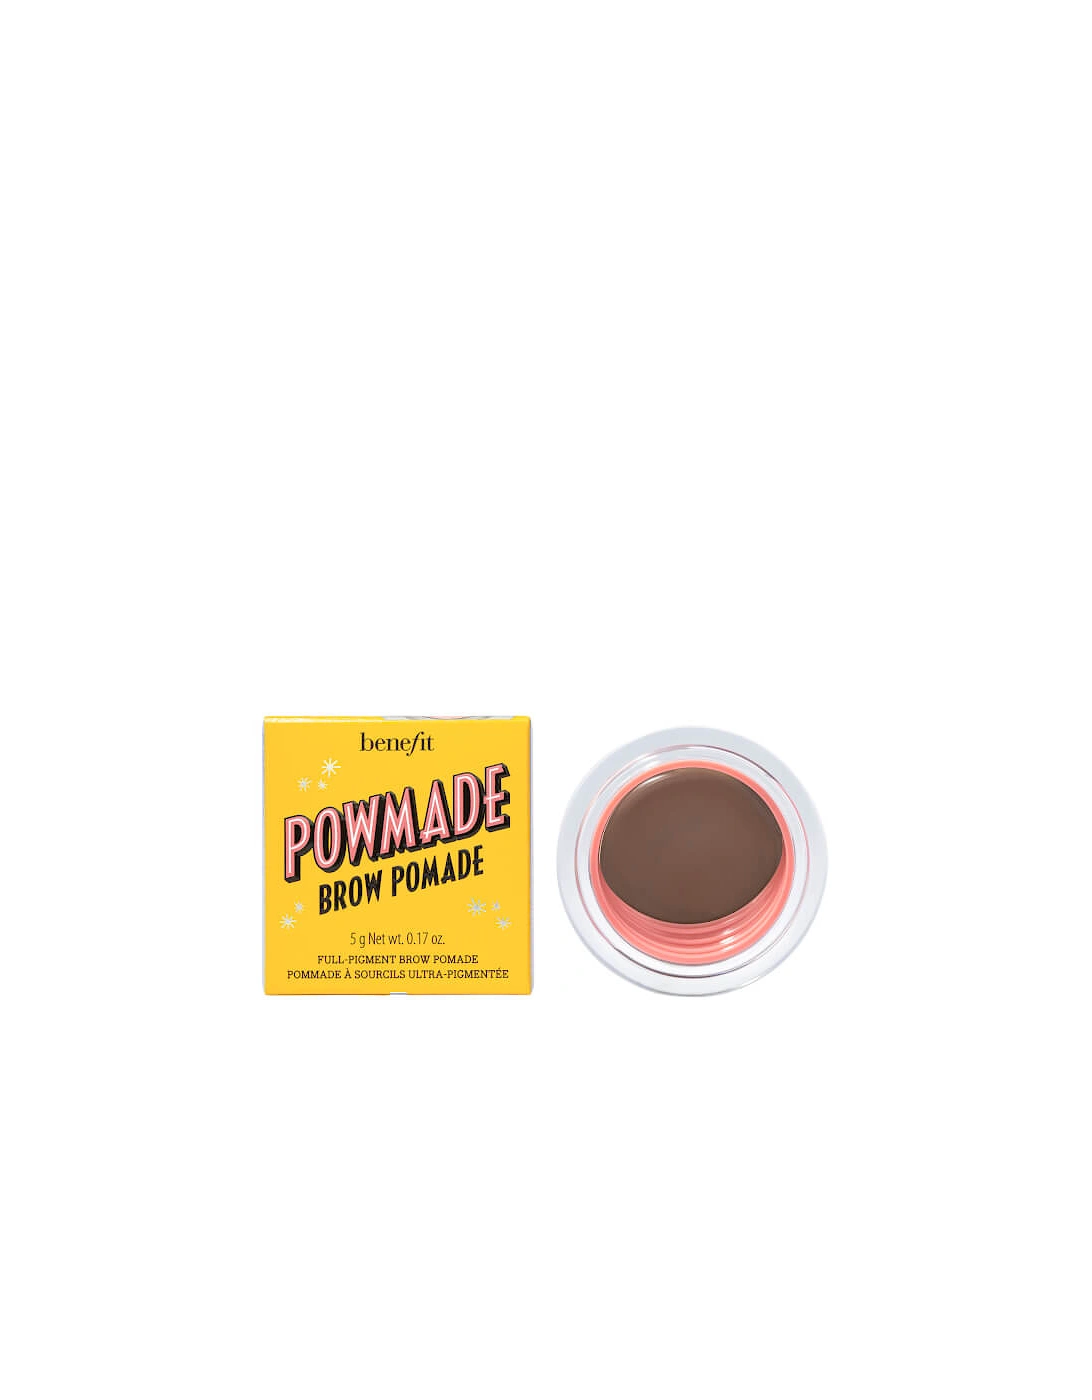 Powmade Full Pigment Eyebrow Pomade - 3 Warm Light Brown, 2 of 1